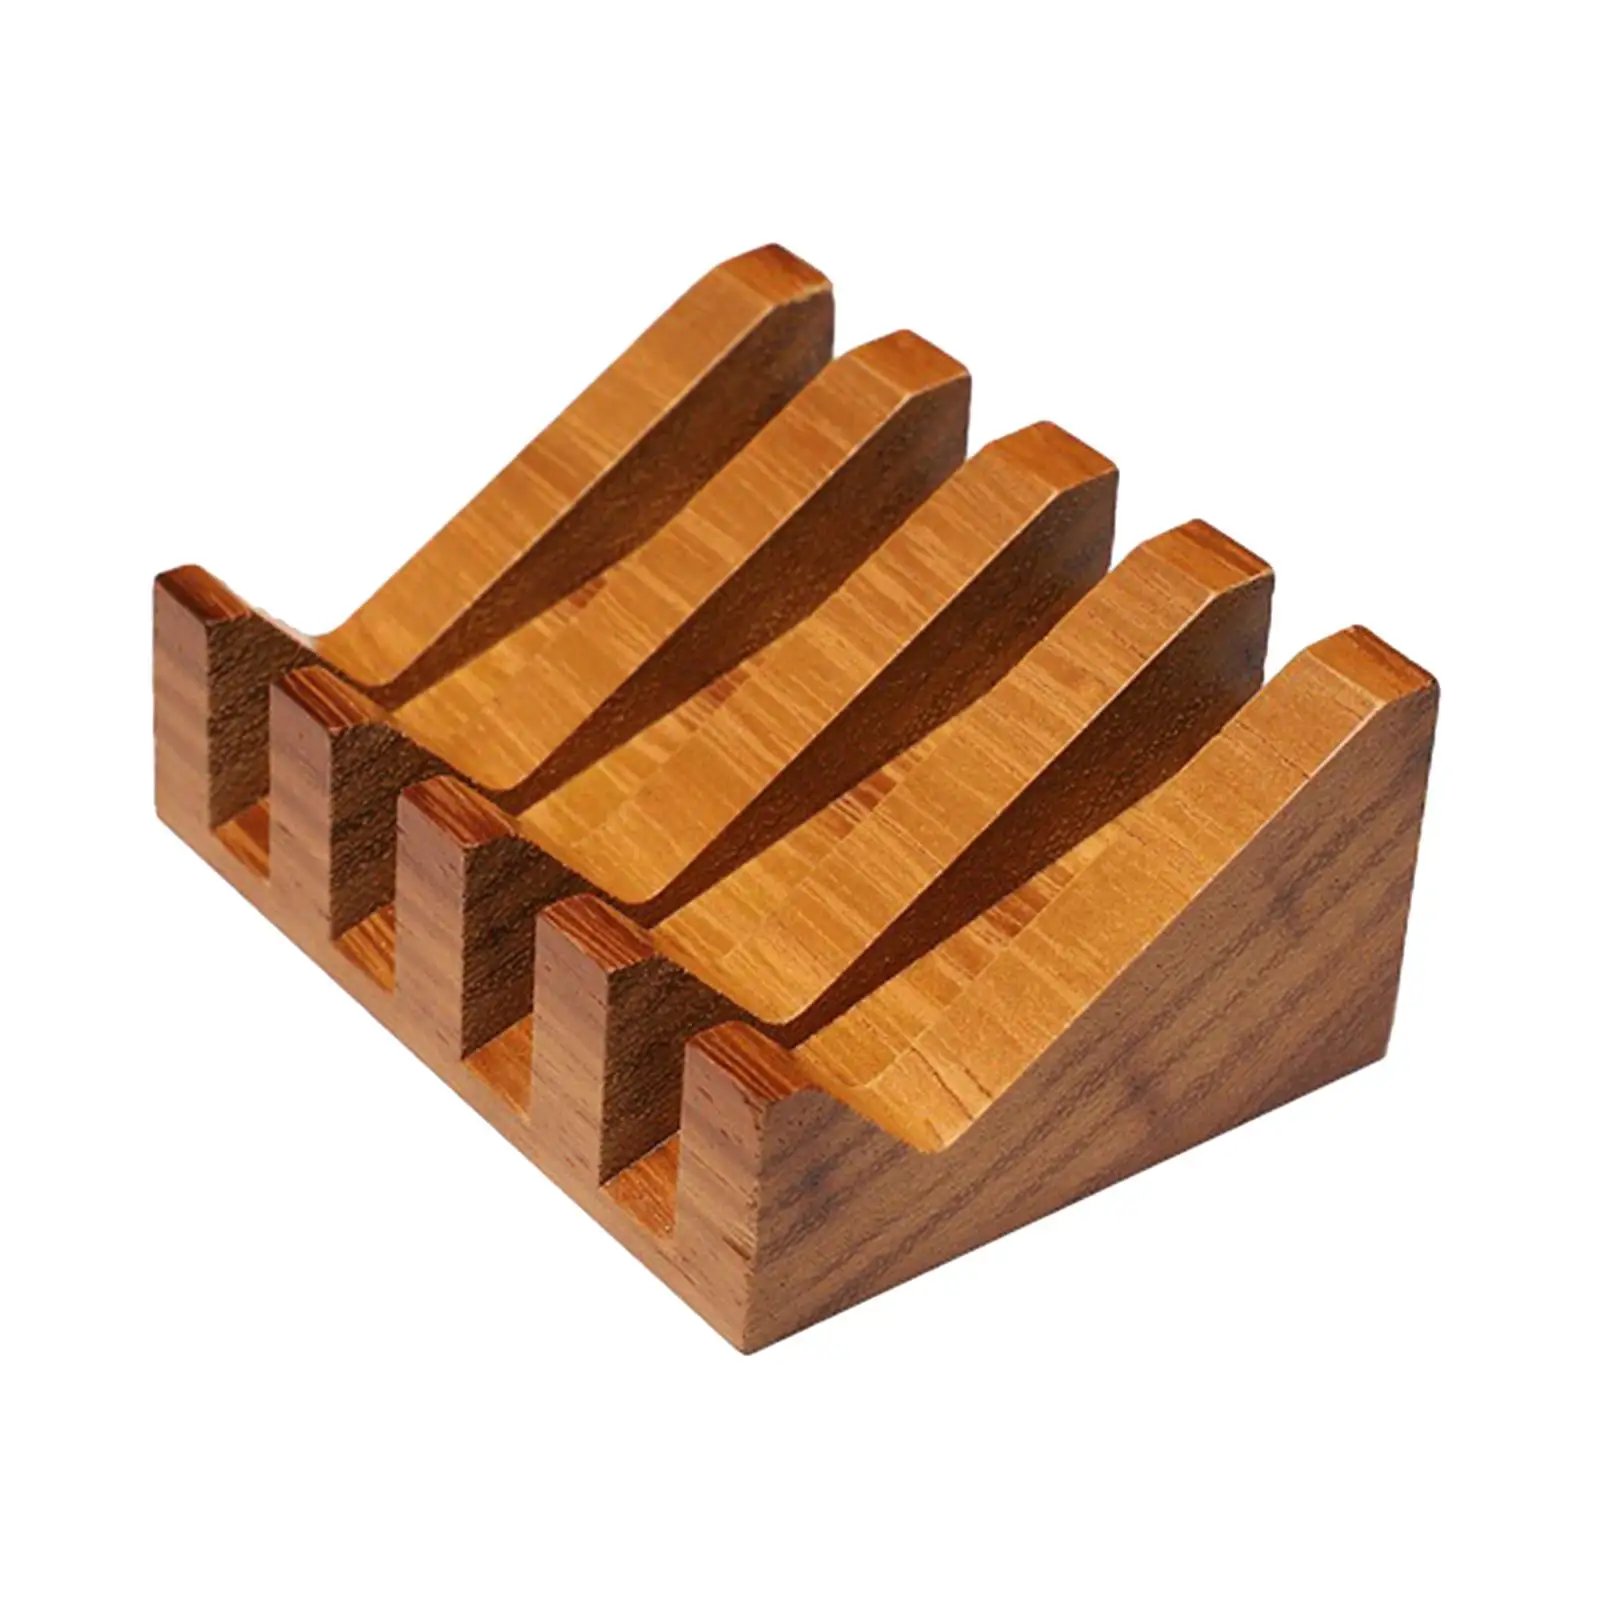 Wooden Soap Dish Home Decor Decorative Tabletop Soap Tray Wooden Soap Holder for Sink Kitchen Bathtub Countertop Bathroom